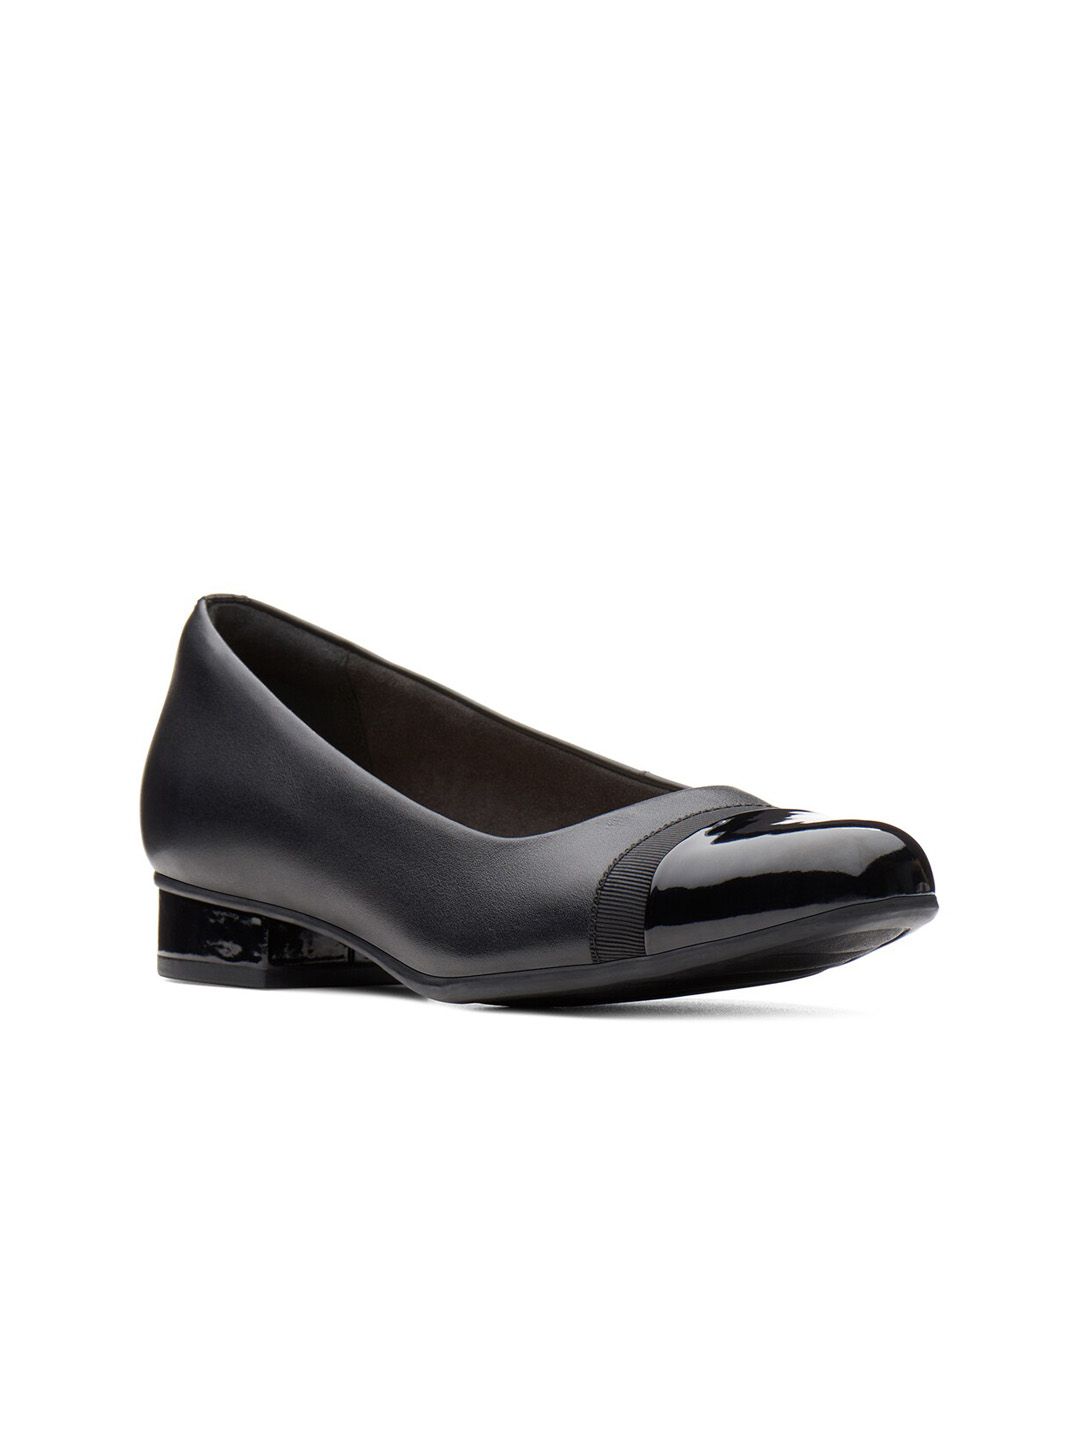 Clarks Women Black Textured Leather Loafers Price in India